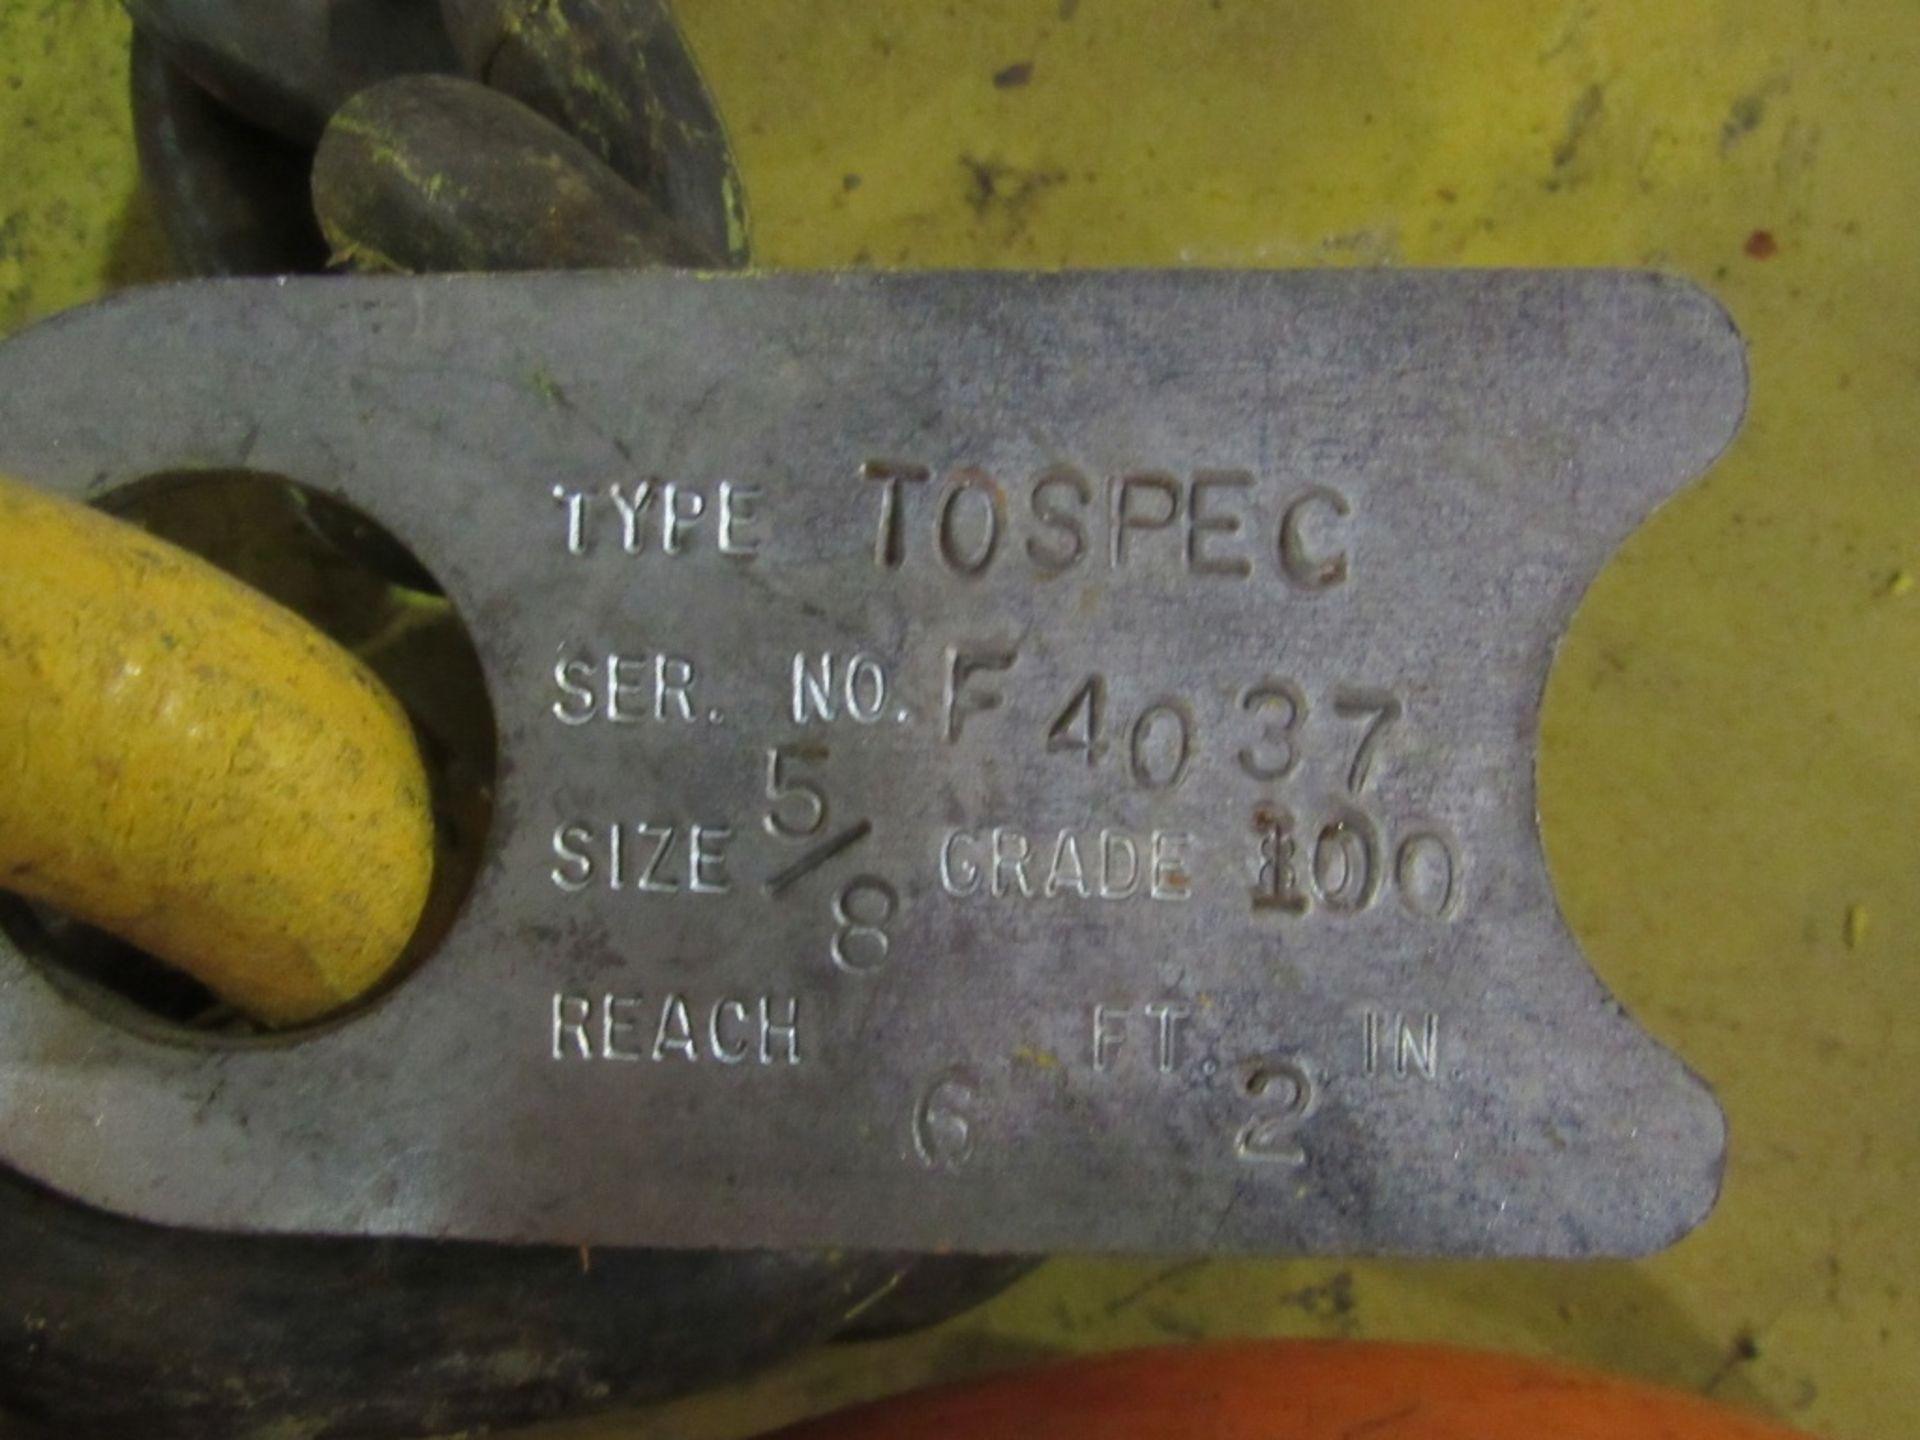 Overhead Crane Parts- ***Located in Cleveland, TN*** MFR - Tragfahigkeit (6) Beams/ Supports 25' x - Image 4 of 10